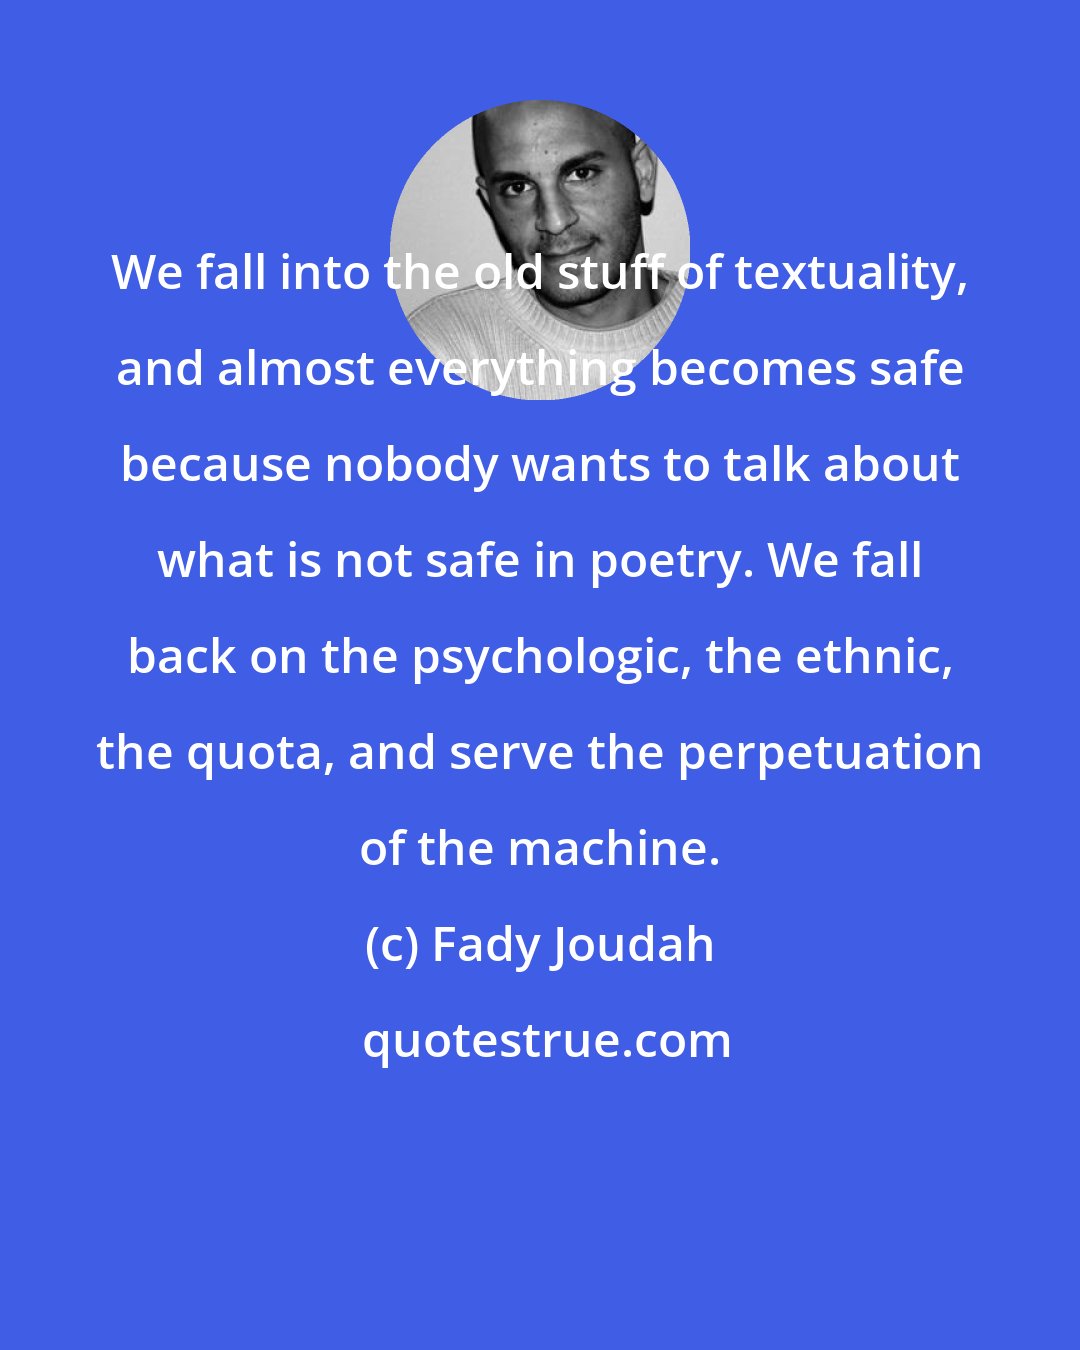 Fady Joudah: We fall into the old stuff of textuality, and almost everything becomes safe because nobody wants to talk about what is not safe in poetry. We fall back on the psychologic, the ethnic, the quota, and serve the perpetuation of the machine.